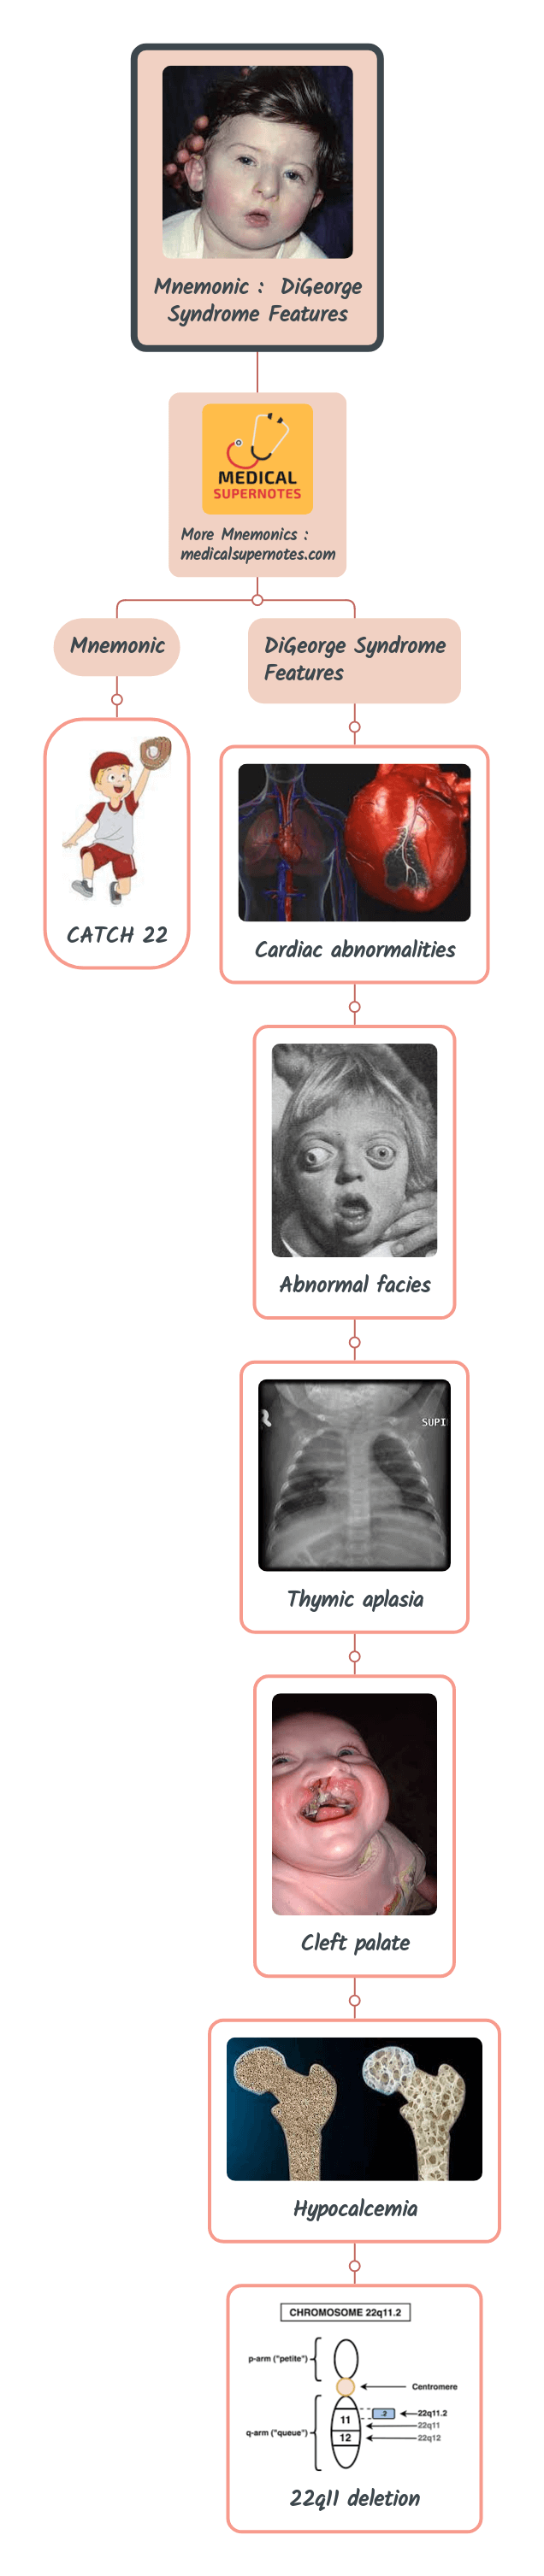 Mnemonic _ DiGeorge Syndrome Features